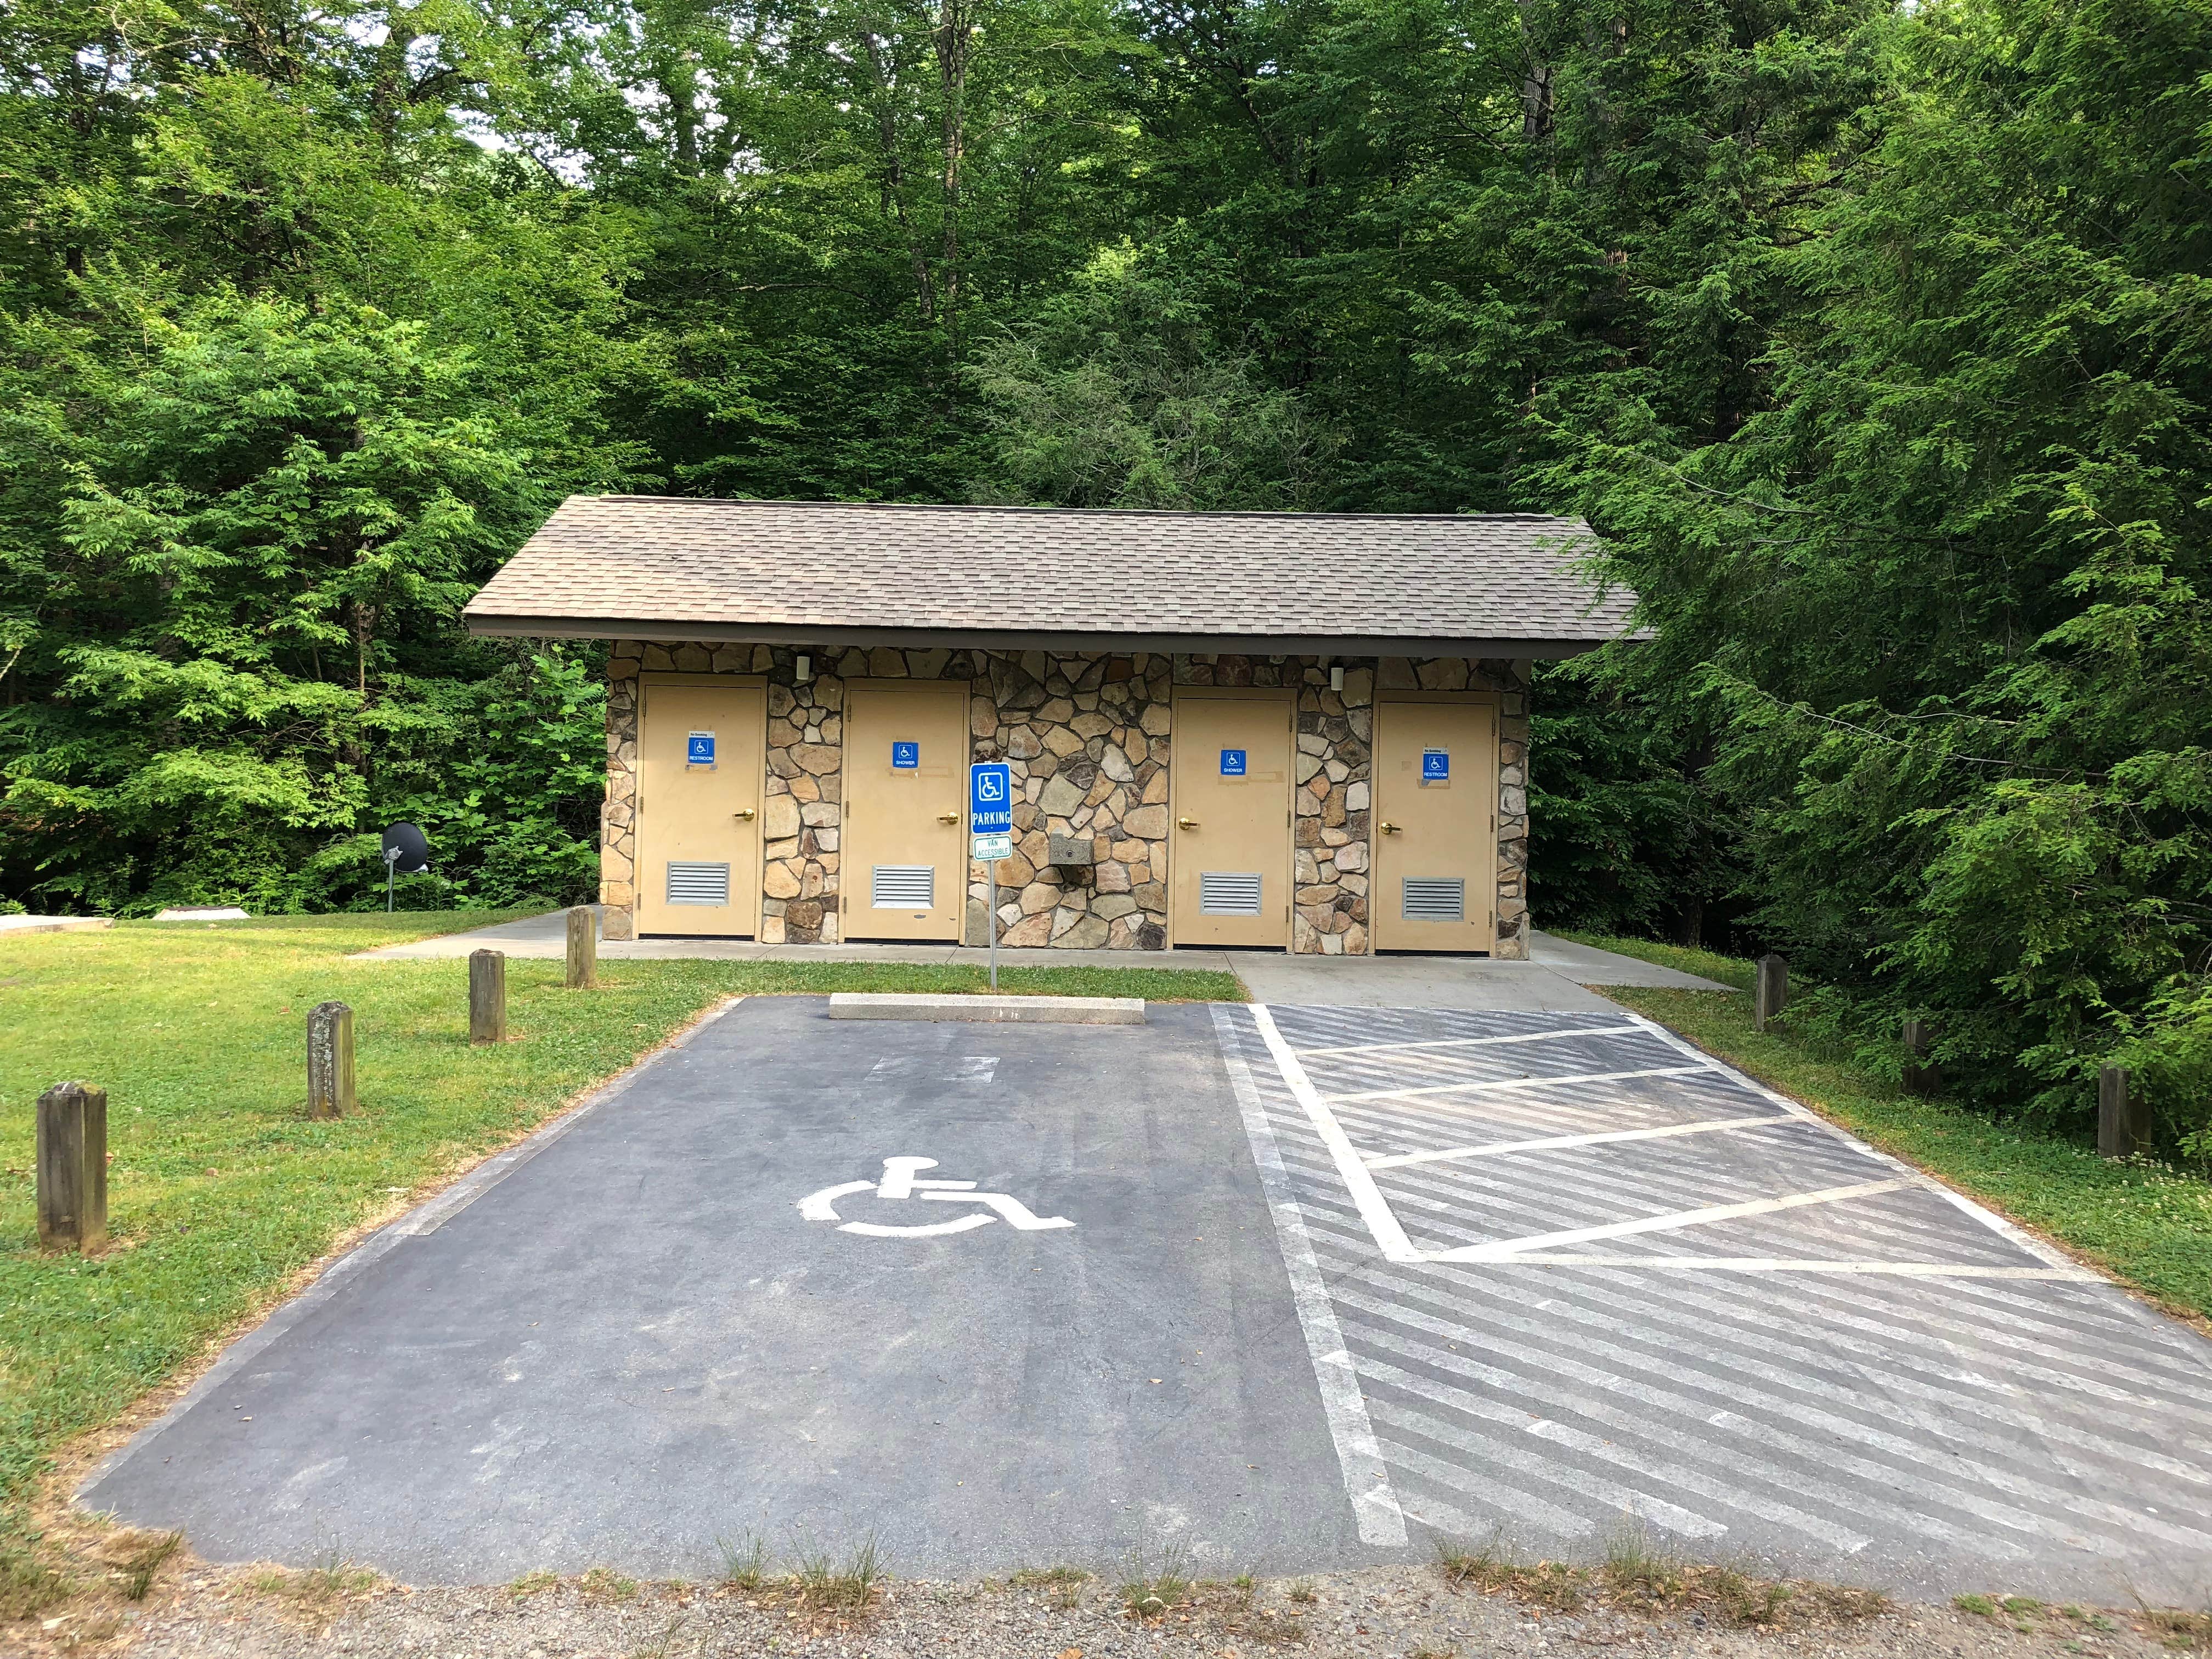 One of the three bathhouses in the main campground. There are additional bathrooms next to the office.